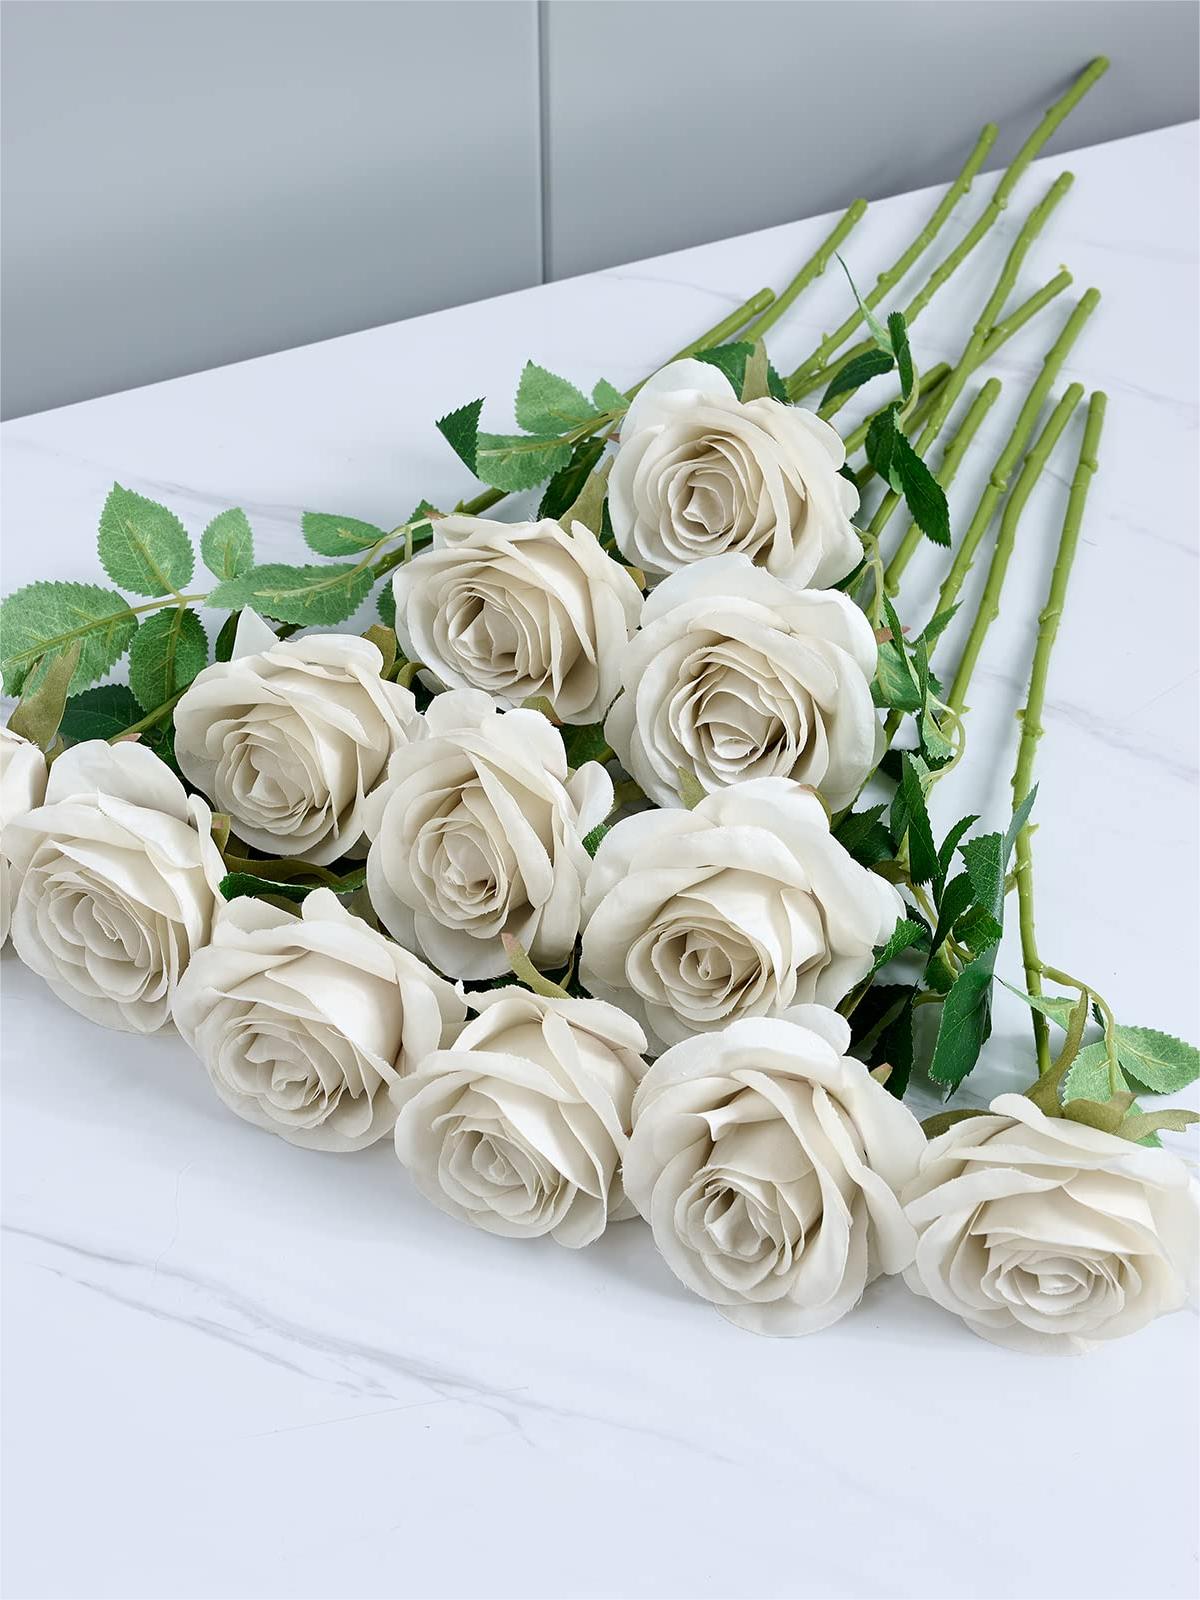 White Gray Artificial Rose Flowers With Long Stems Wedding Bouquet Centerpieces Decorations HH8041